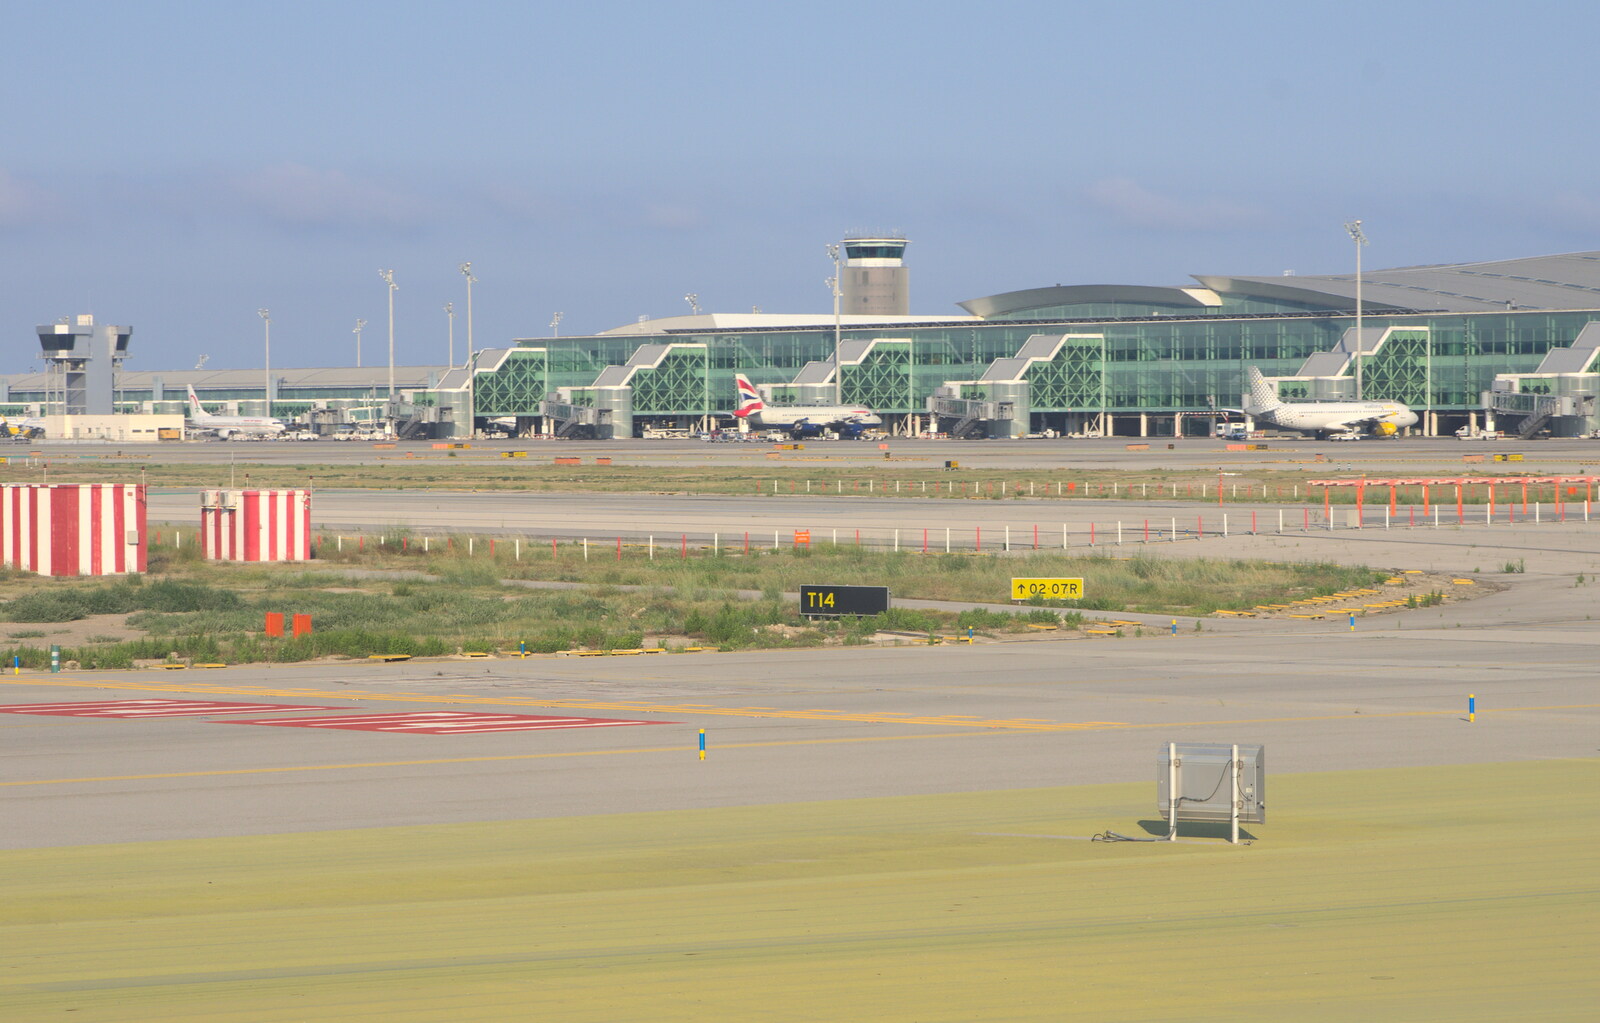 The actual Barcelonda airport from The Open Education Challenge, Barcelona, Catalonia - 13th July 2014